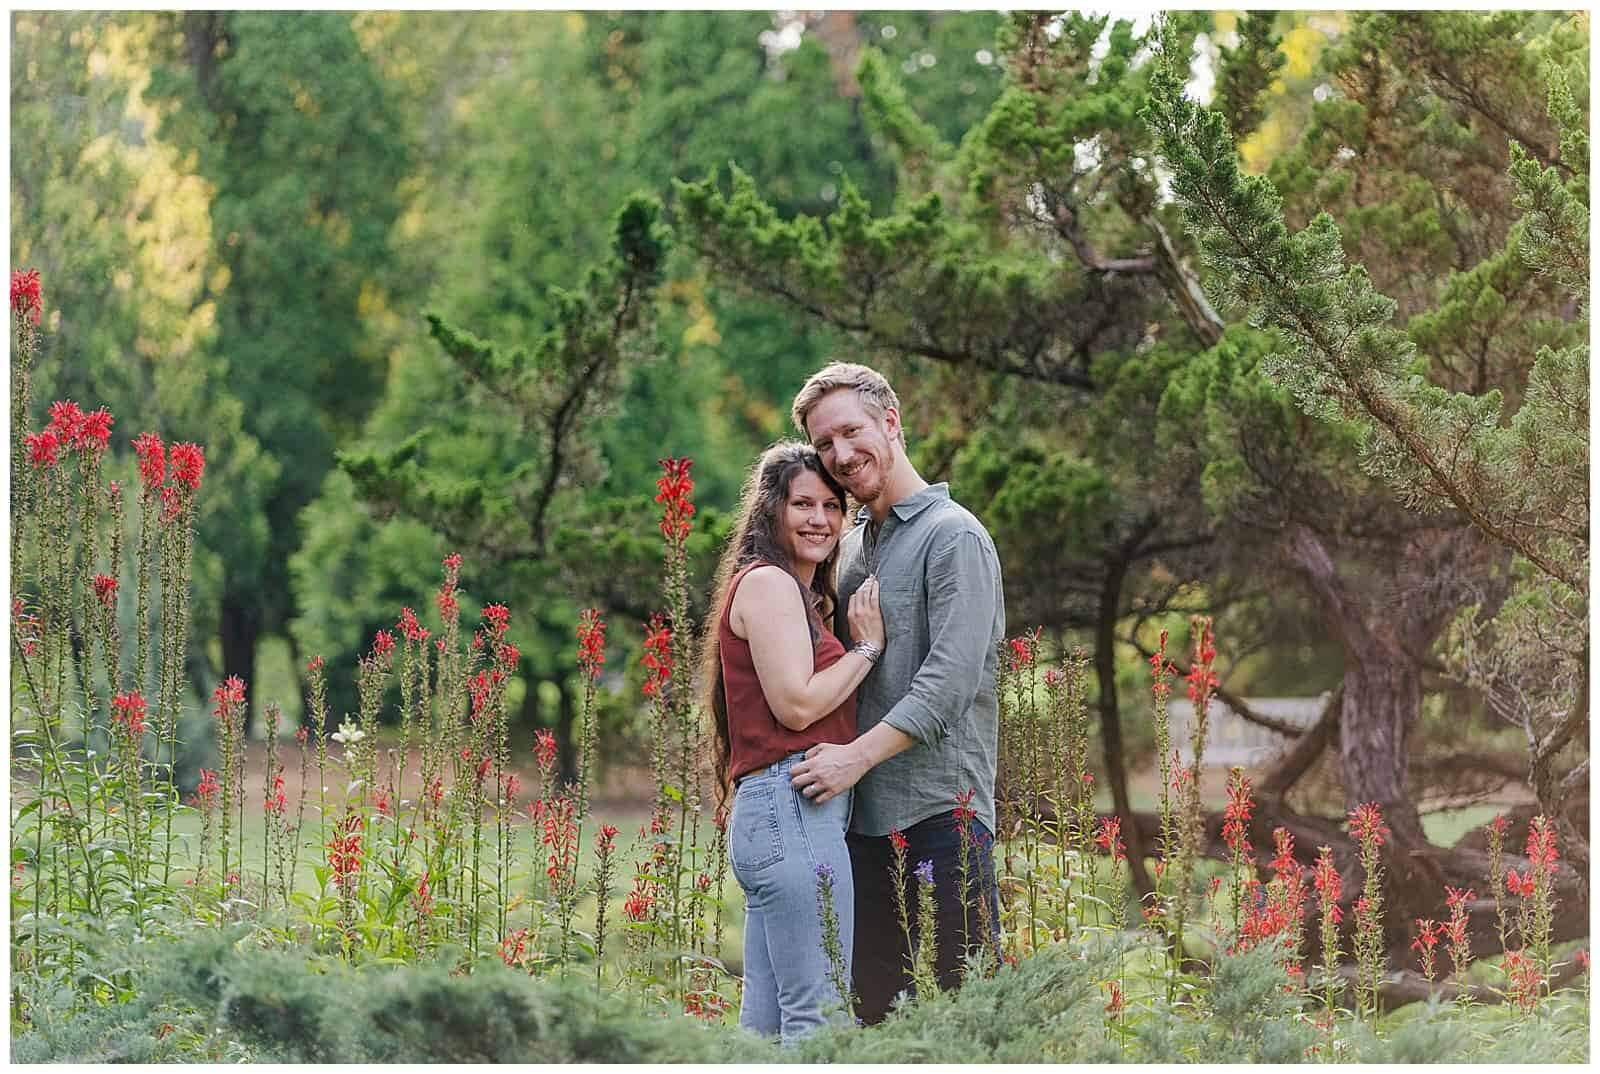 Couple cuddles up chest to chest and smiles at the camera amid red and green florals at blandy experimental farm in front royal virginia